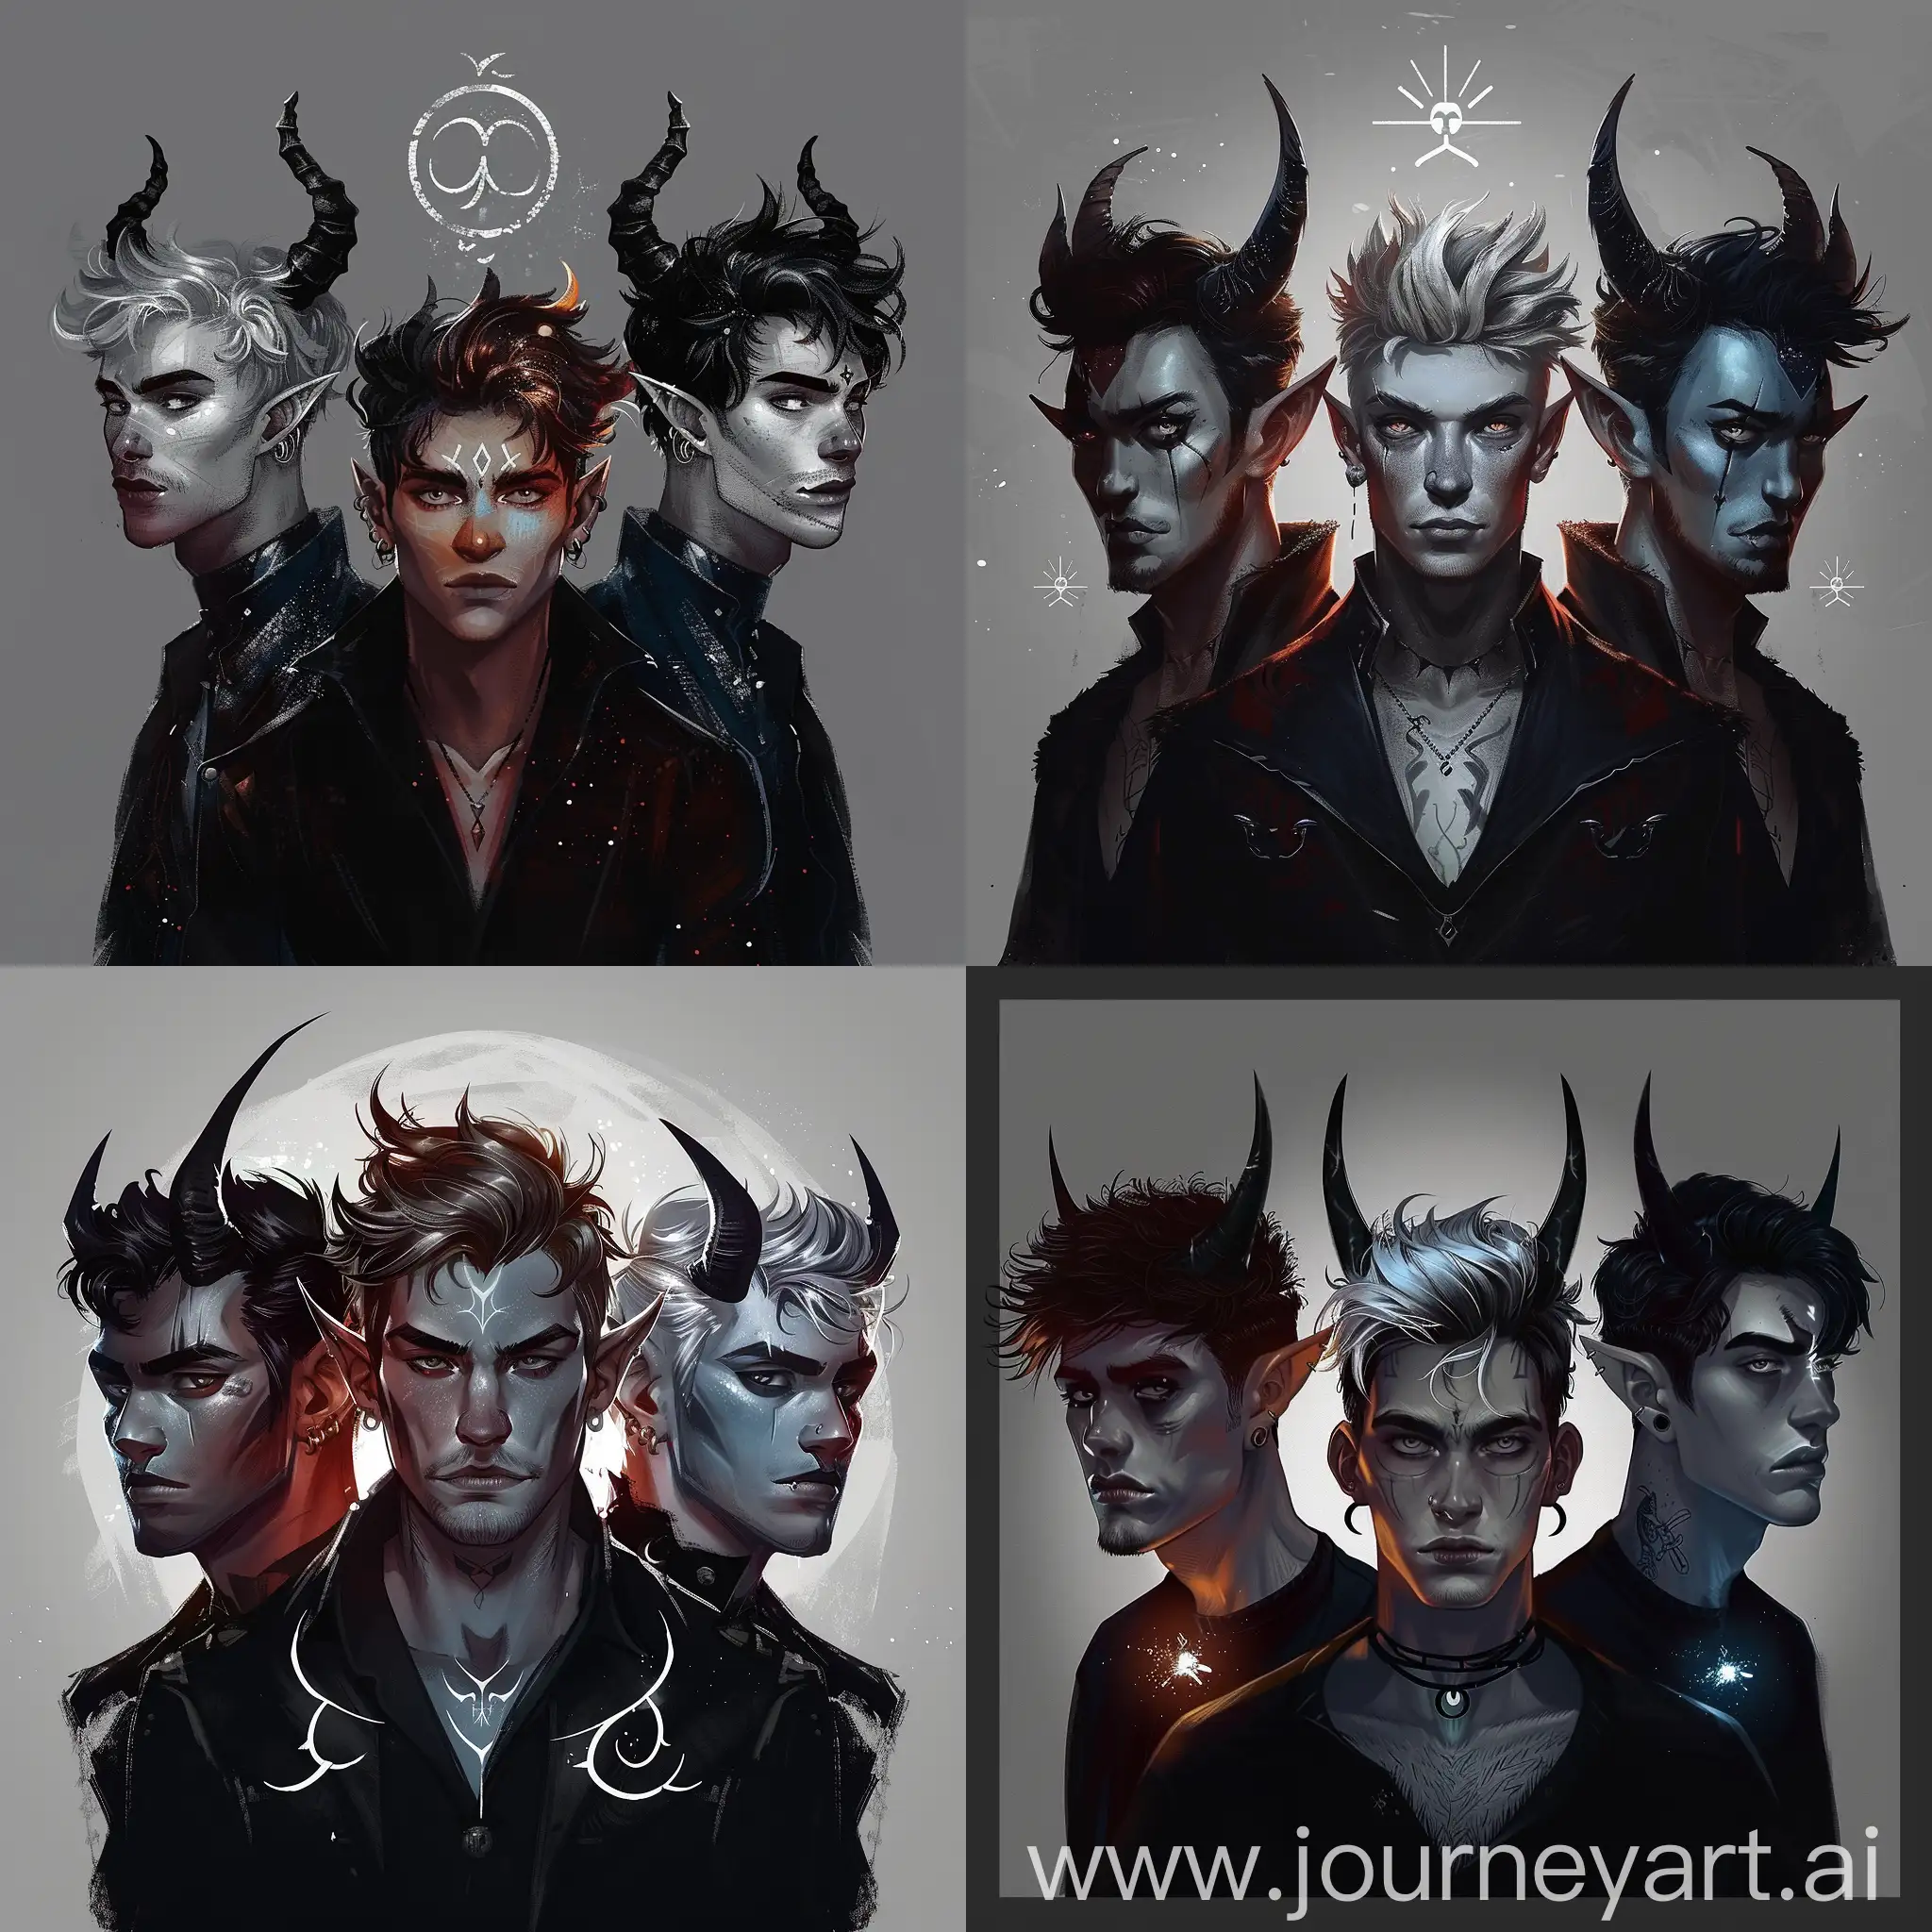 Can you make me three men stnading side by side. can you make them look semi realistic. Can you make sure they each have a diffrent hair style. give them pointed ears and horns